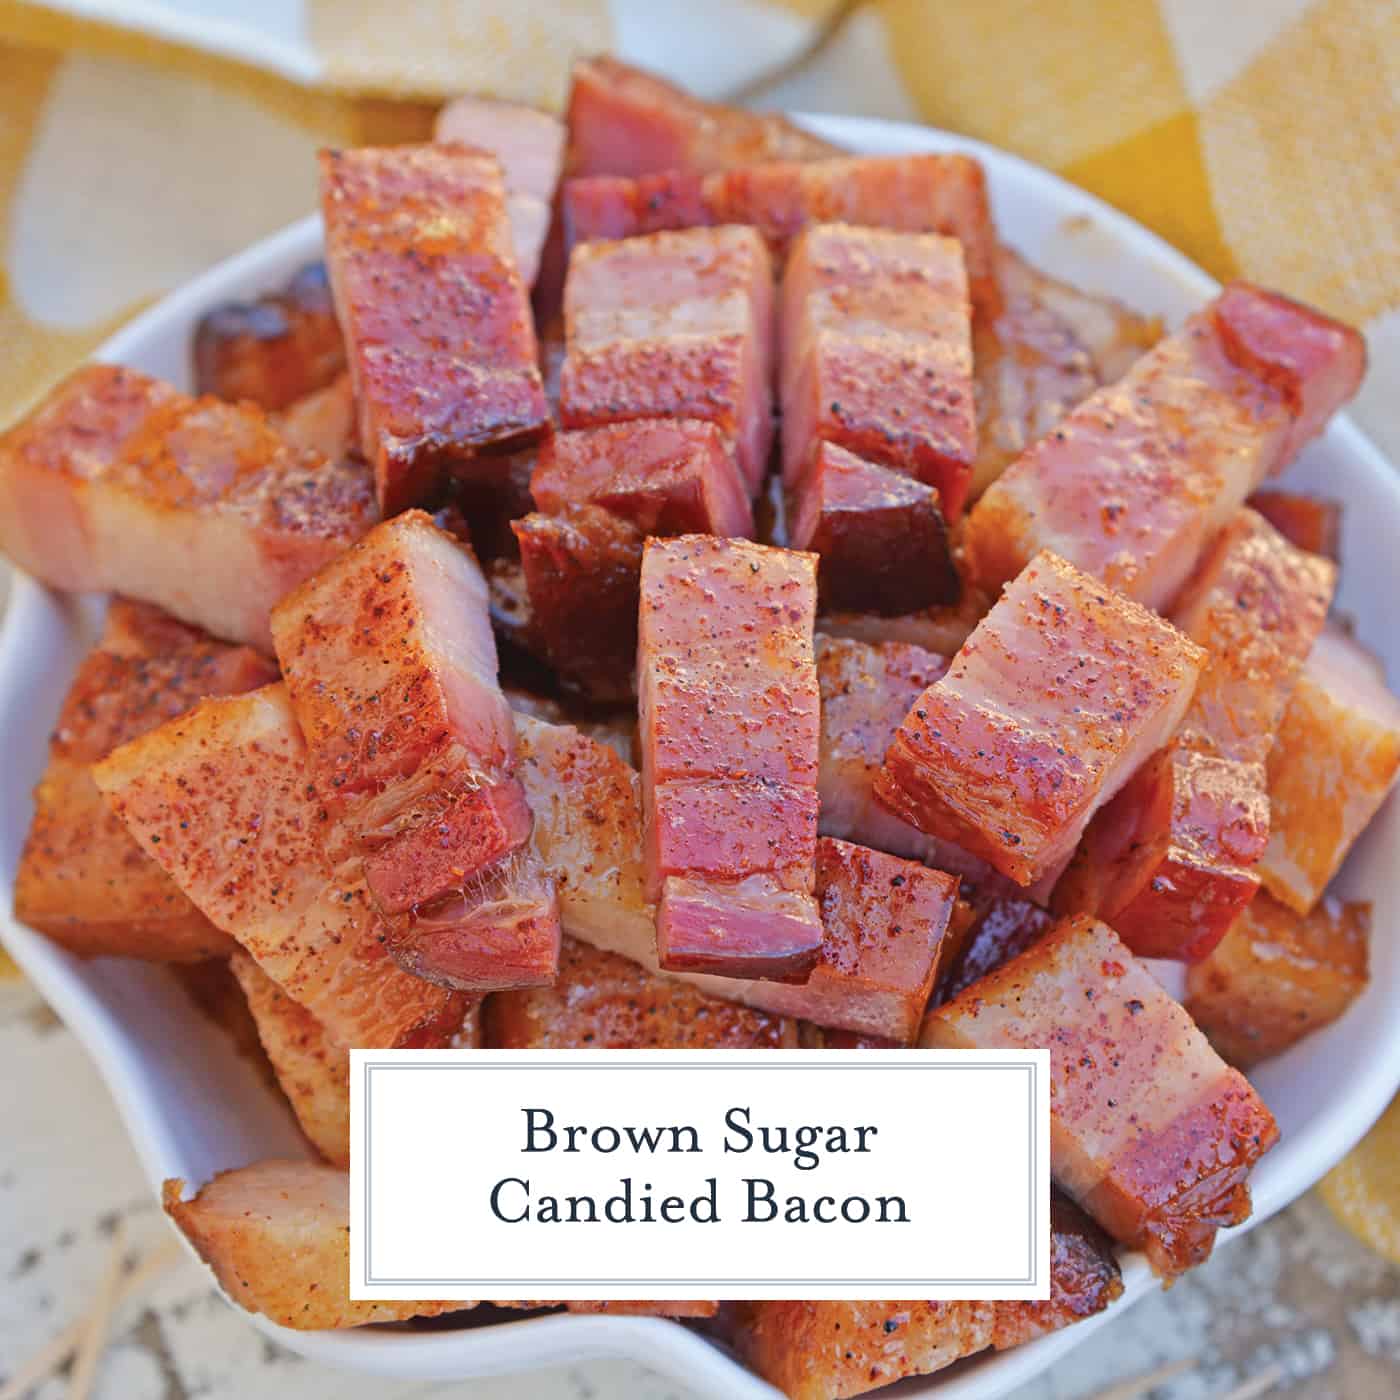 Candied bacon is the best sweet and salty snack with a kick. Serve as strips or bites, bacon is caramelized with brown sugar and and a touch of heat. #candiedbacon #pigcandy #brownsugarbacon www.savoryexperiments.com